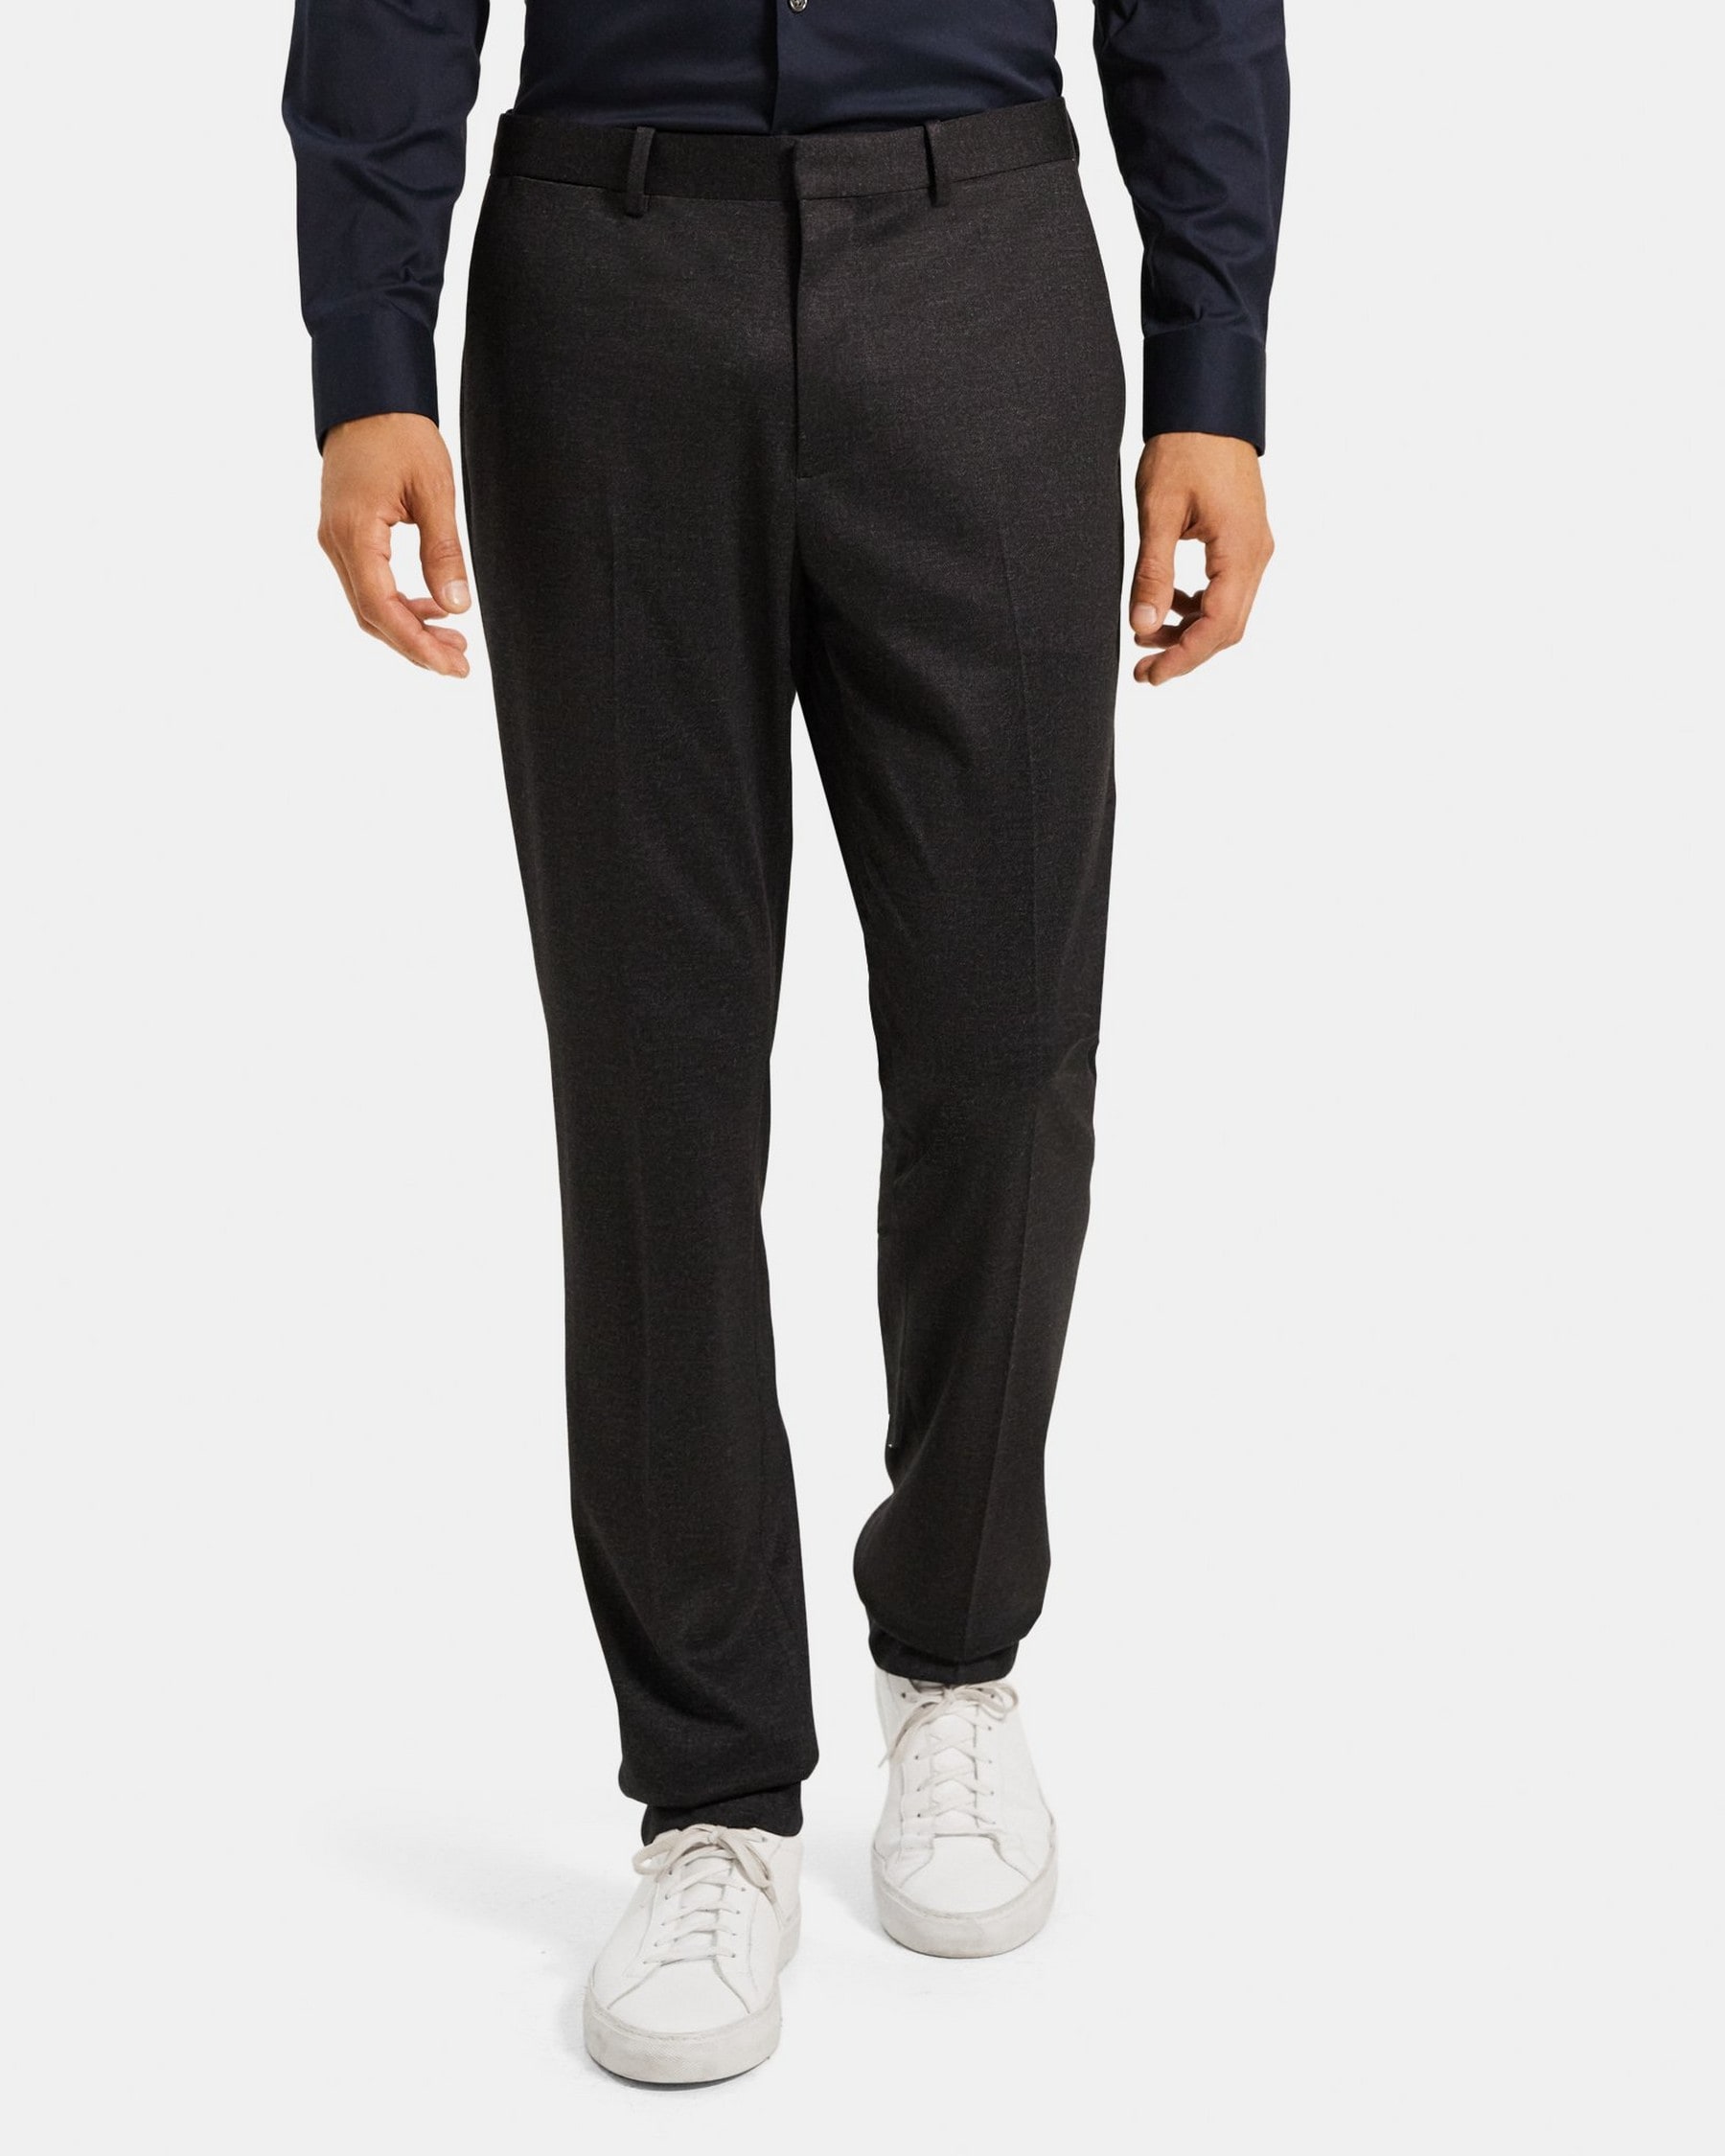 Knit Twill Slim-Fit Suit Pant | Theory Outlet